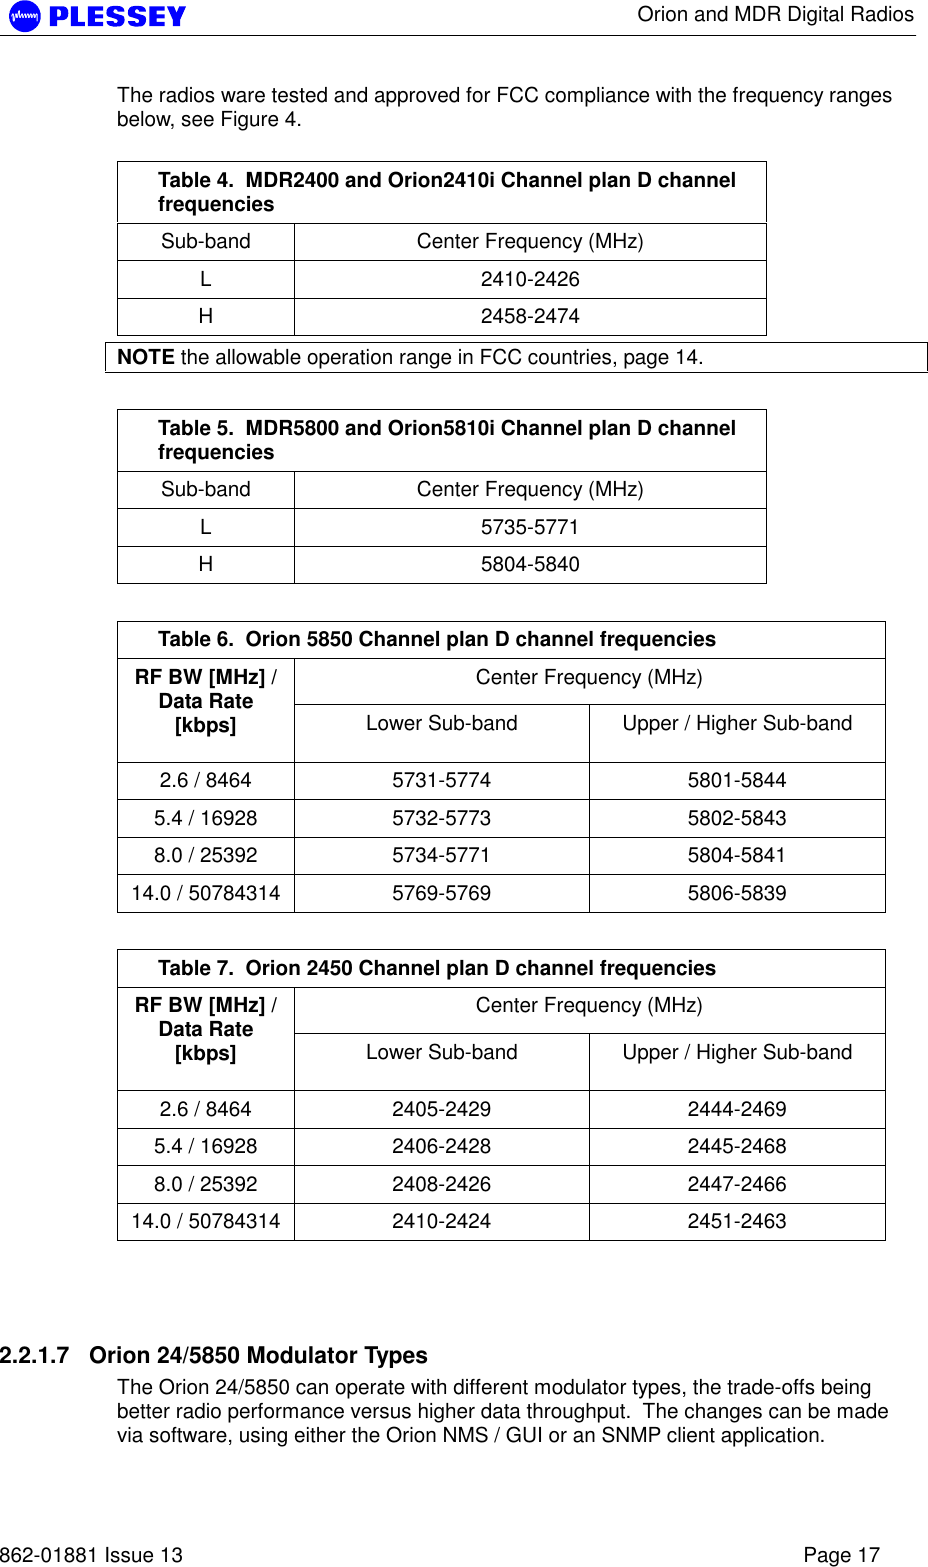      Orion and MDR Digital Radios   862-01881 Issue 13    Page 17 The radios ware tested and approved for FCC compliance with the frequency ranges below, see Figure 4.  Table 4.  MDR2400 and Orion2410i Channel plan D channel frequencies Sub-band  Center Frequency (MHz) L 2410-2426 H 2458-2474 NOTE the allowable operation range in FCC countries, page 14.  Table 5.  MDR5800 and Orion5810i Channel plan D channel frequencies Sub-band  Center Frequency (MHz) L 5735-5771 H 5804-5840  Table 6.  Orion 5850 Channel plan D channel frequencies Center Frequency (MHz) RF BW [MHz] / Data Rate [kbps]  Lower Sub-band  Upper / Higher Sub-band 2.6 / 8464  5731-5774  5801-5844 5.4 / 16928  5732-5773  5802-5843 8.0 / 25392  5734-5771  5804-5841 14.0 / 50784314  5769-5769  5806-5839  Table 7.  Orion 2450 Channel plan D channel frequencies Center Frequency (MHz) RF BW [MHz] / Data Rate [kbps]  Lower Sub-band  Upper / Higher Sub-band 2.6 / 8464  2405-2429  2444-2469 5.4 / 16928  2406-2428  2445-2468 8.0 / 25392  2408-2426  2447-2466 14.0 / 50784314  2410-2424  2451-2463  2.2.1.7  Orion 24/5850 Modulator Types The Orion 24/5850 can operate with different modulator types, the trade-offs being better radio performance versus higher data throughput.  The changes can be made via software, using either the Orion NMS / GUI or an SNMP client application. 